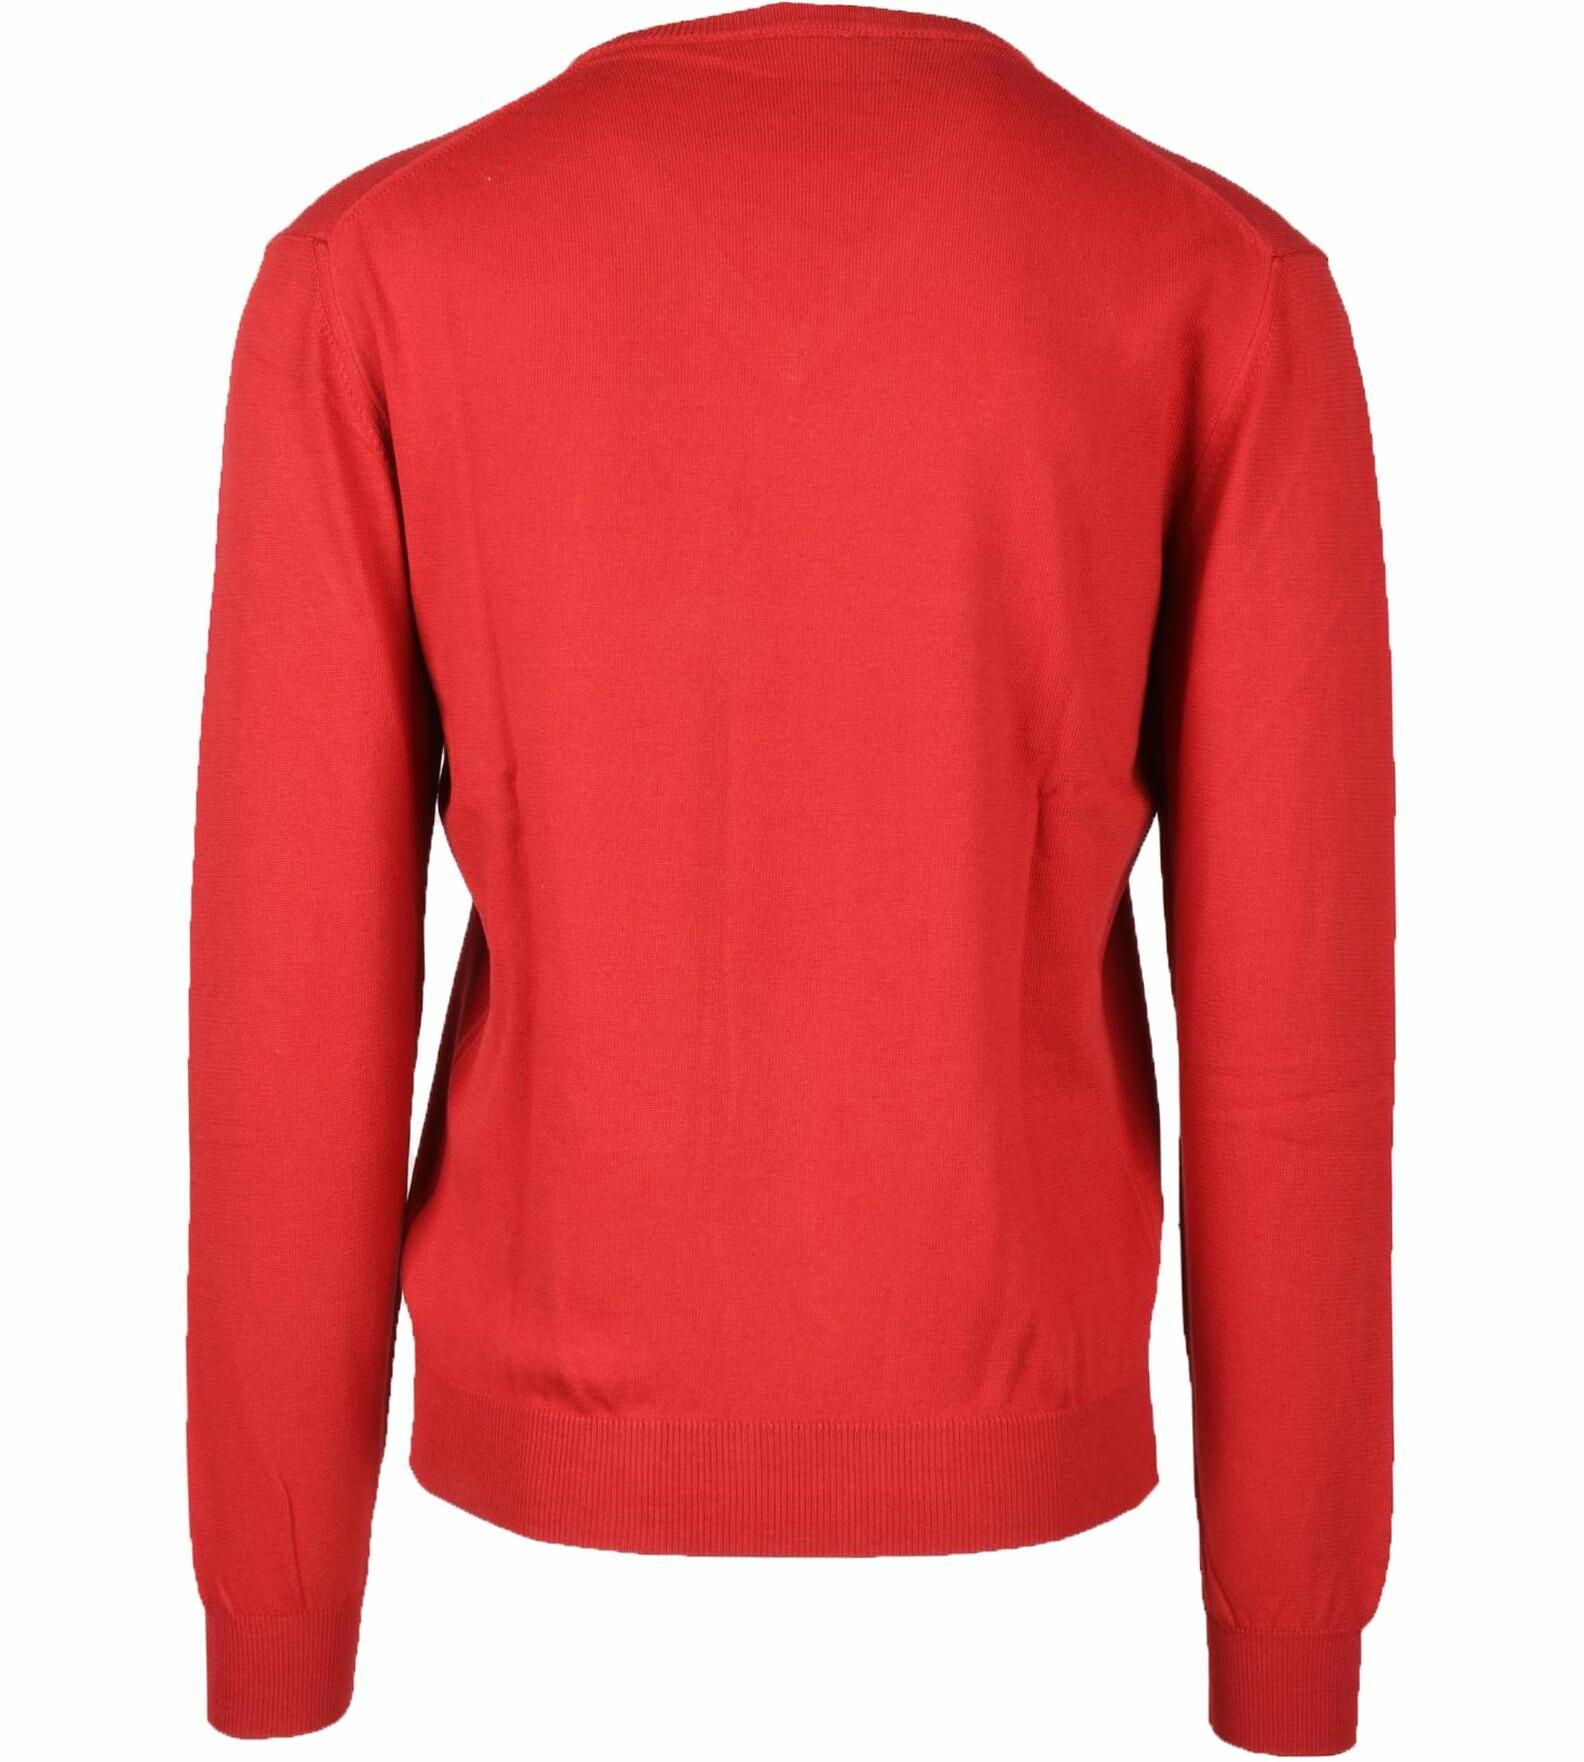 NORTH SAILS Men's Red Sweater 3XL at FORZIERI